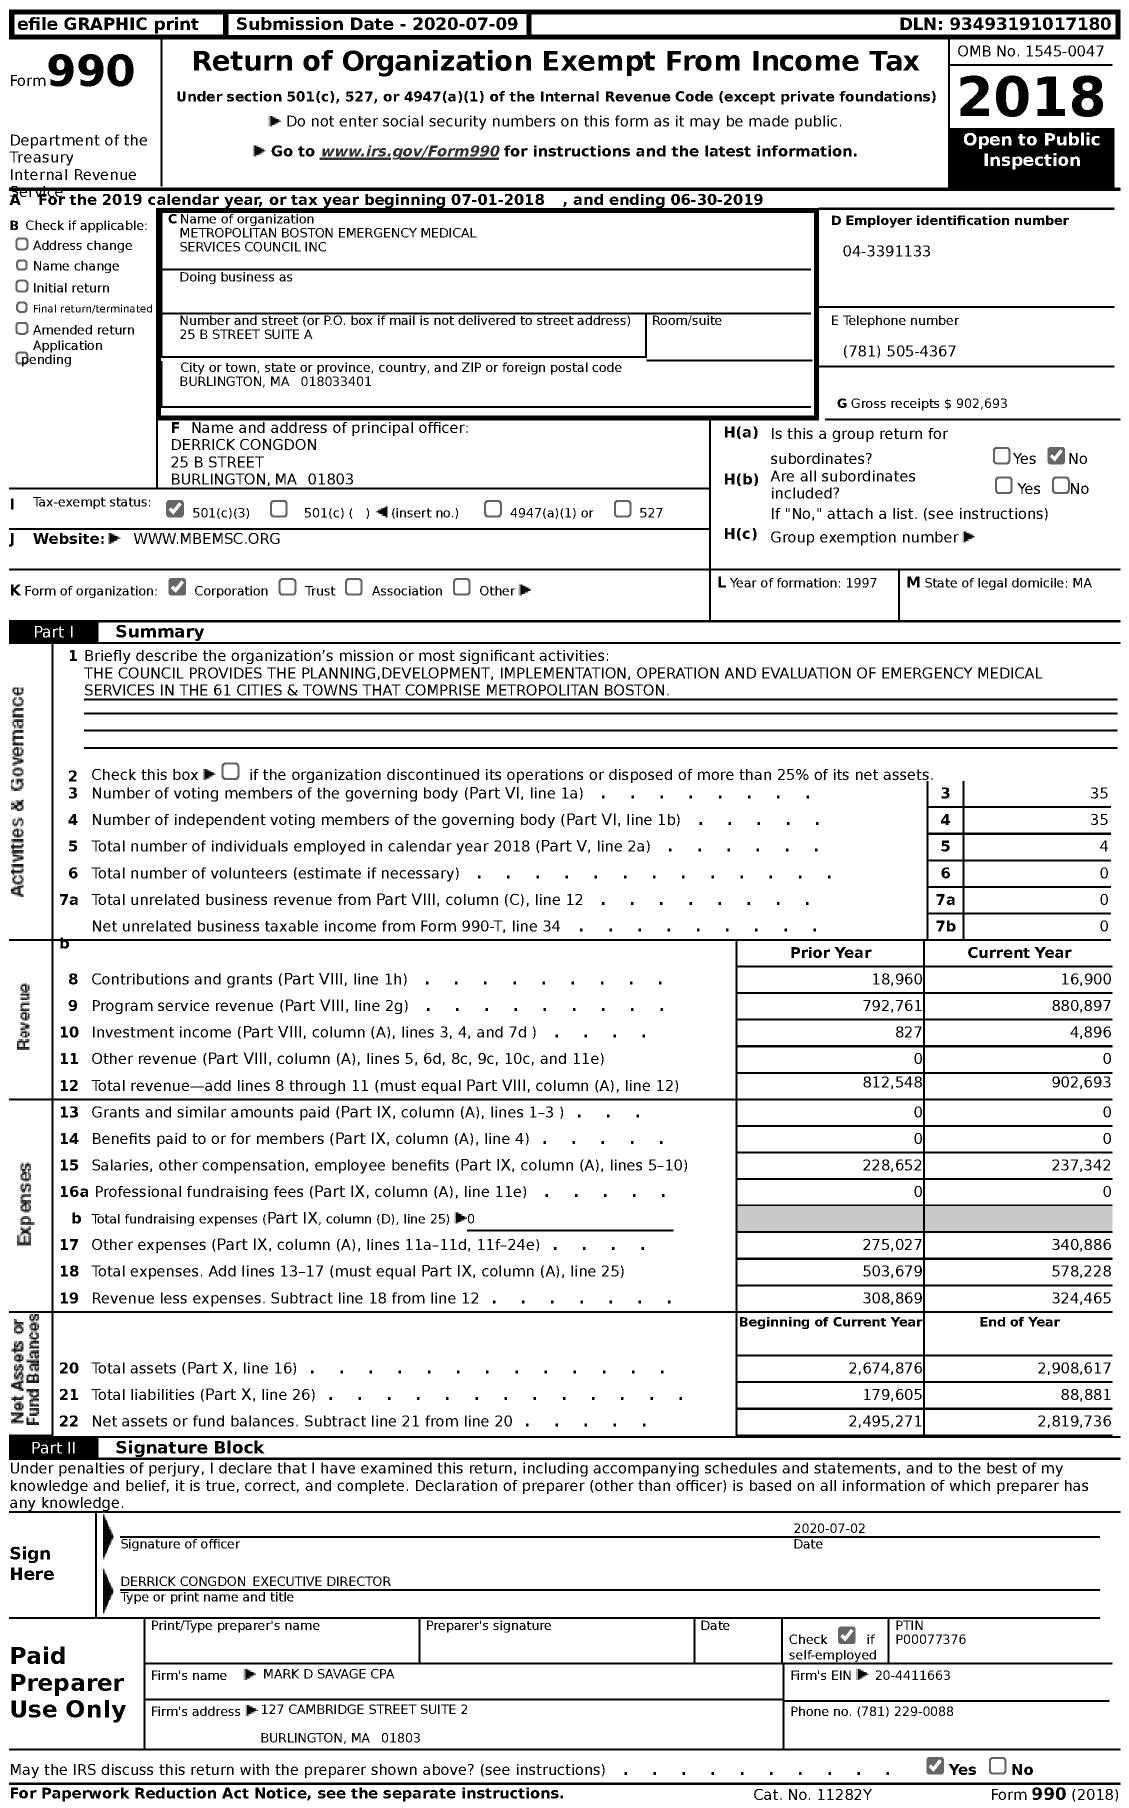 Image of first page of 2018 Form 990 for Metropolitan Boston Emergency Medical Services Services Council